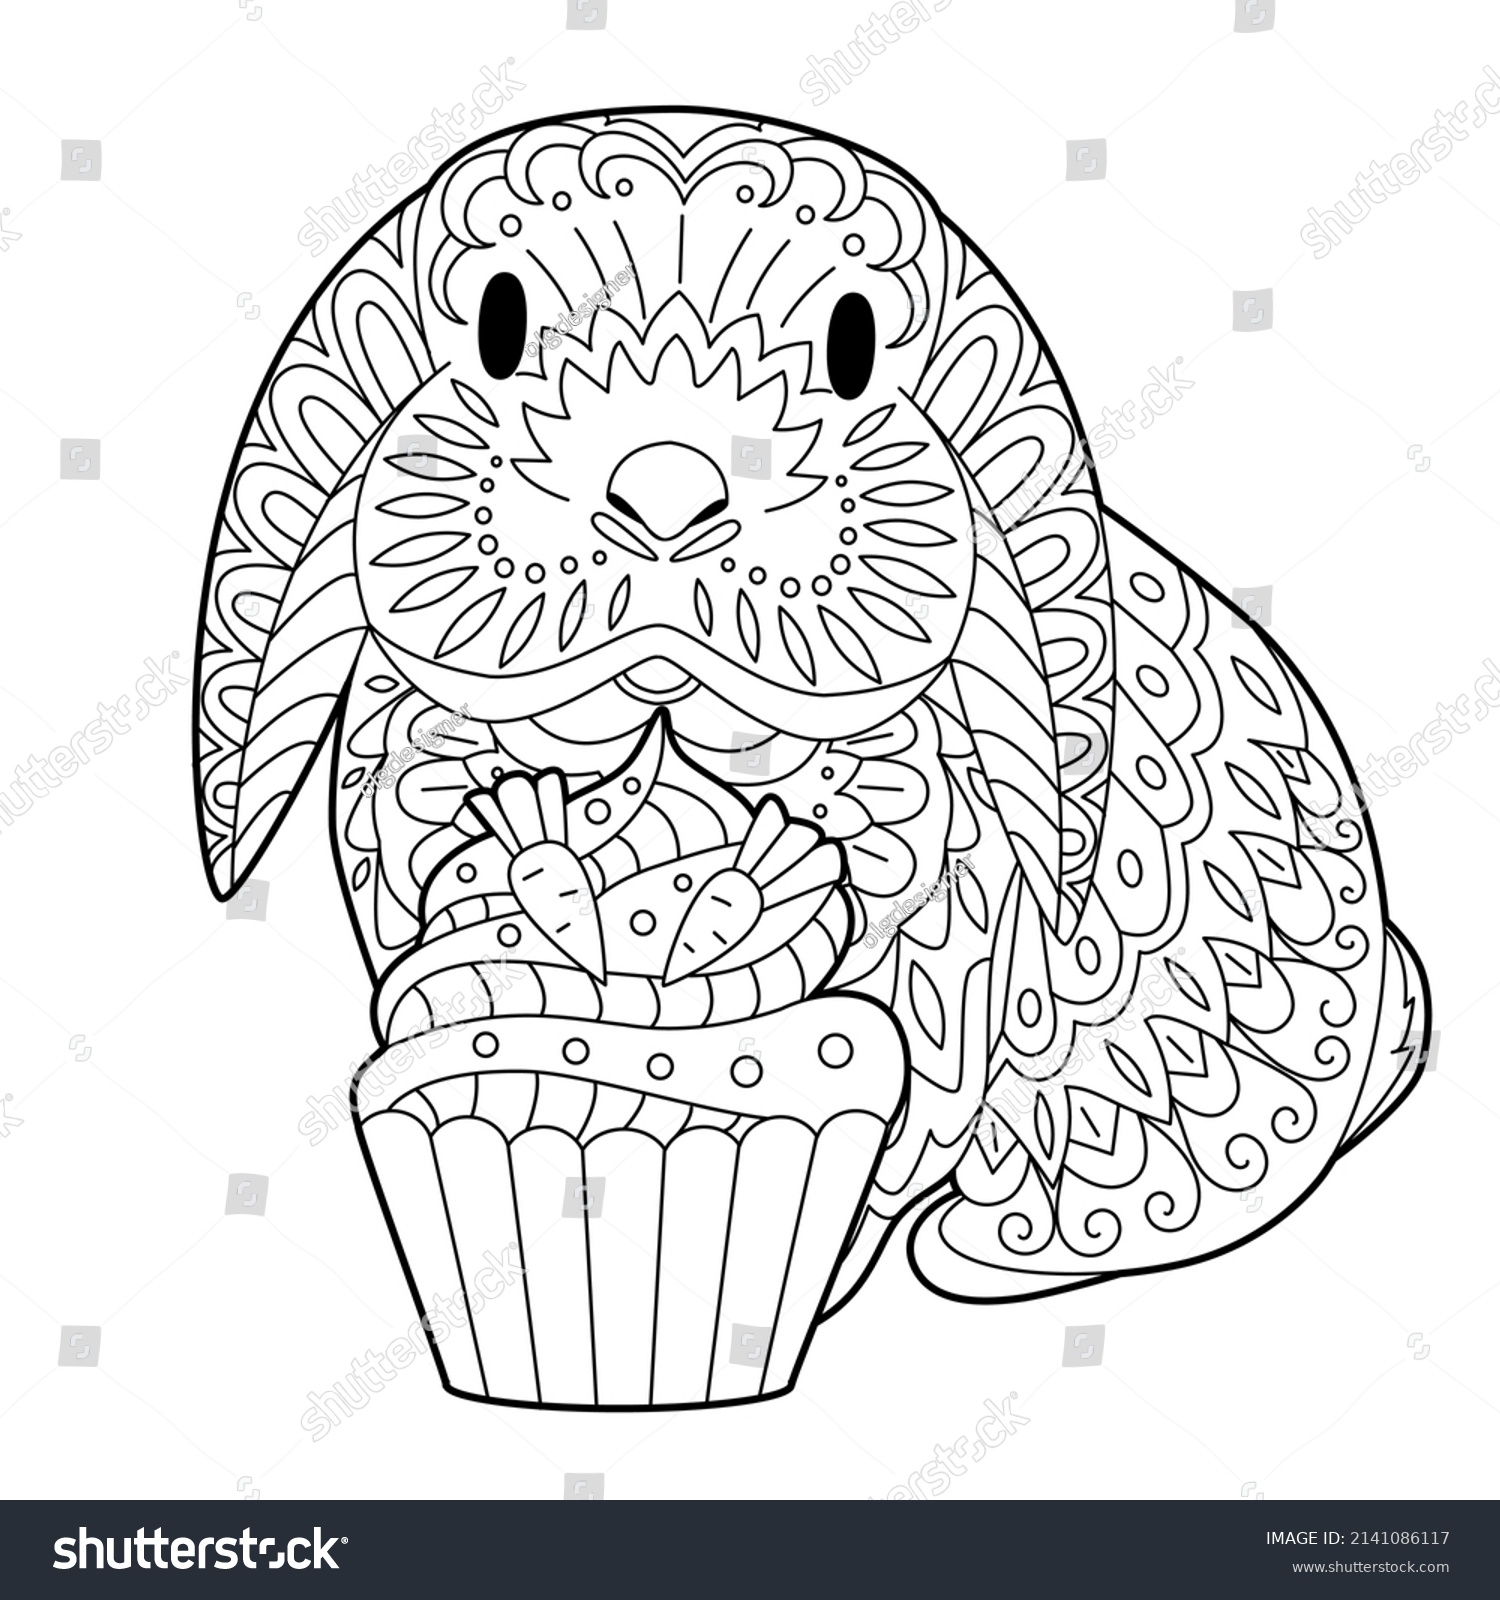 Super Cute Rabbit Cupcake Coloring Page Stock Vector (Royalty Free ...